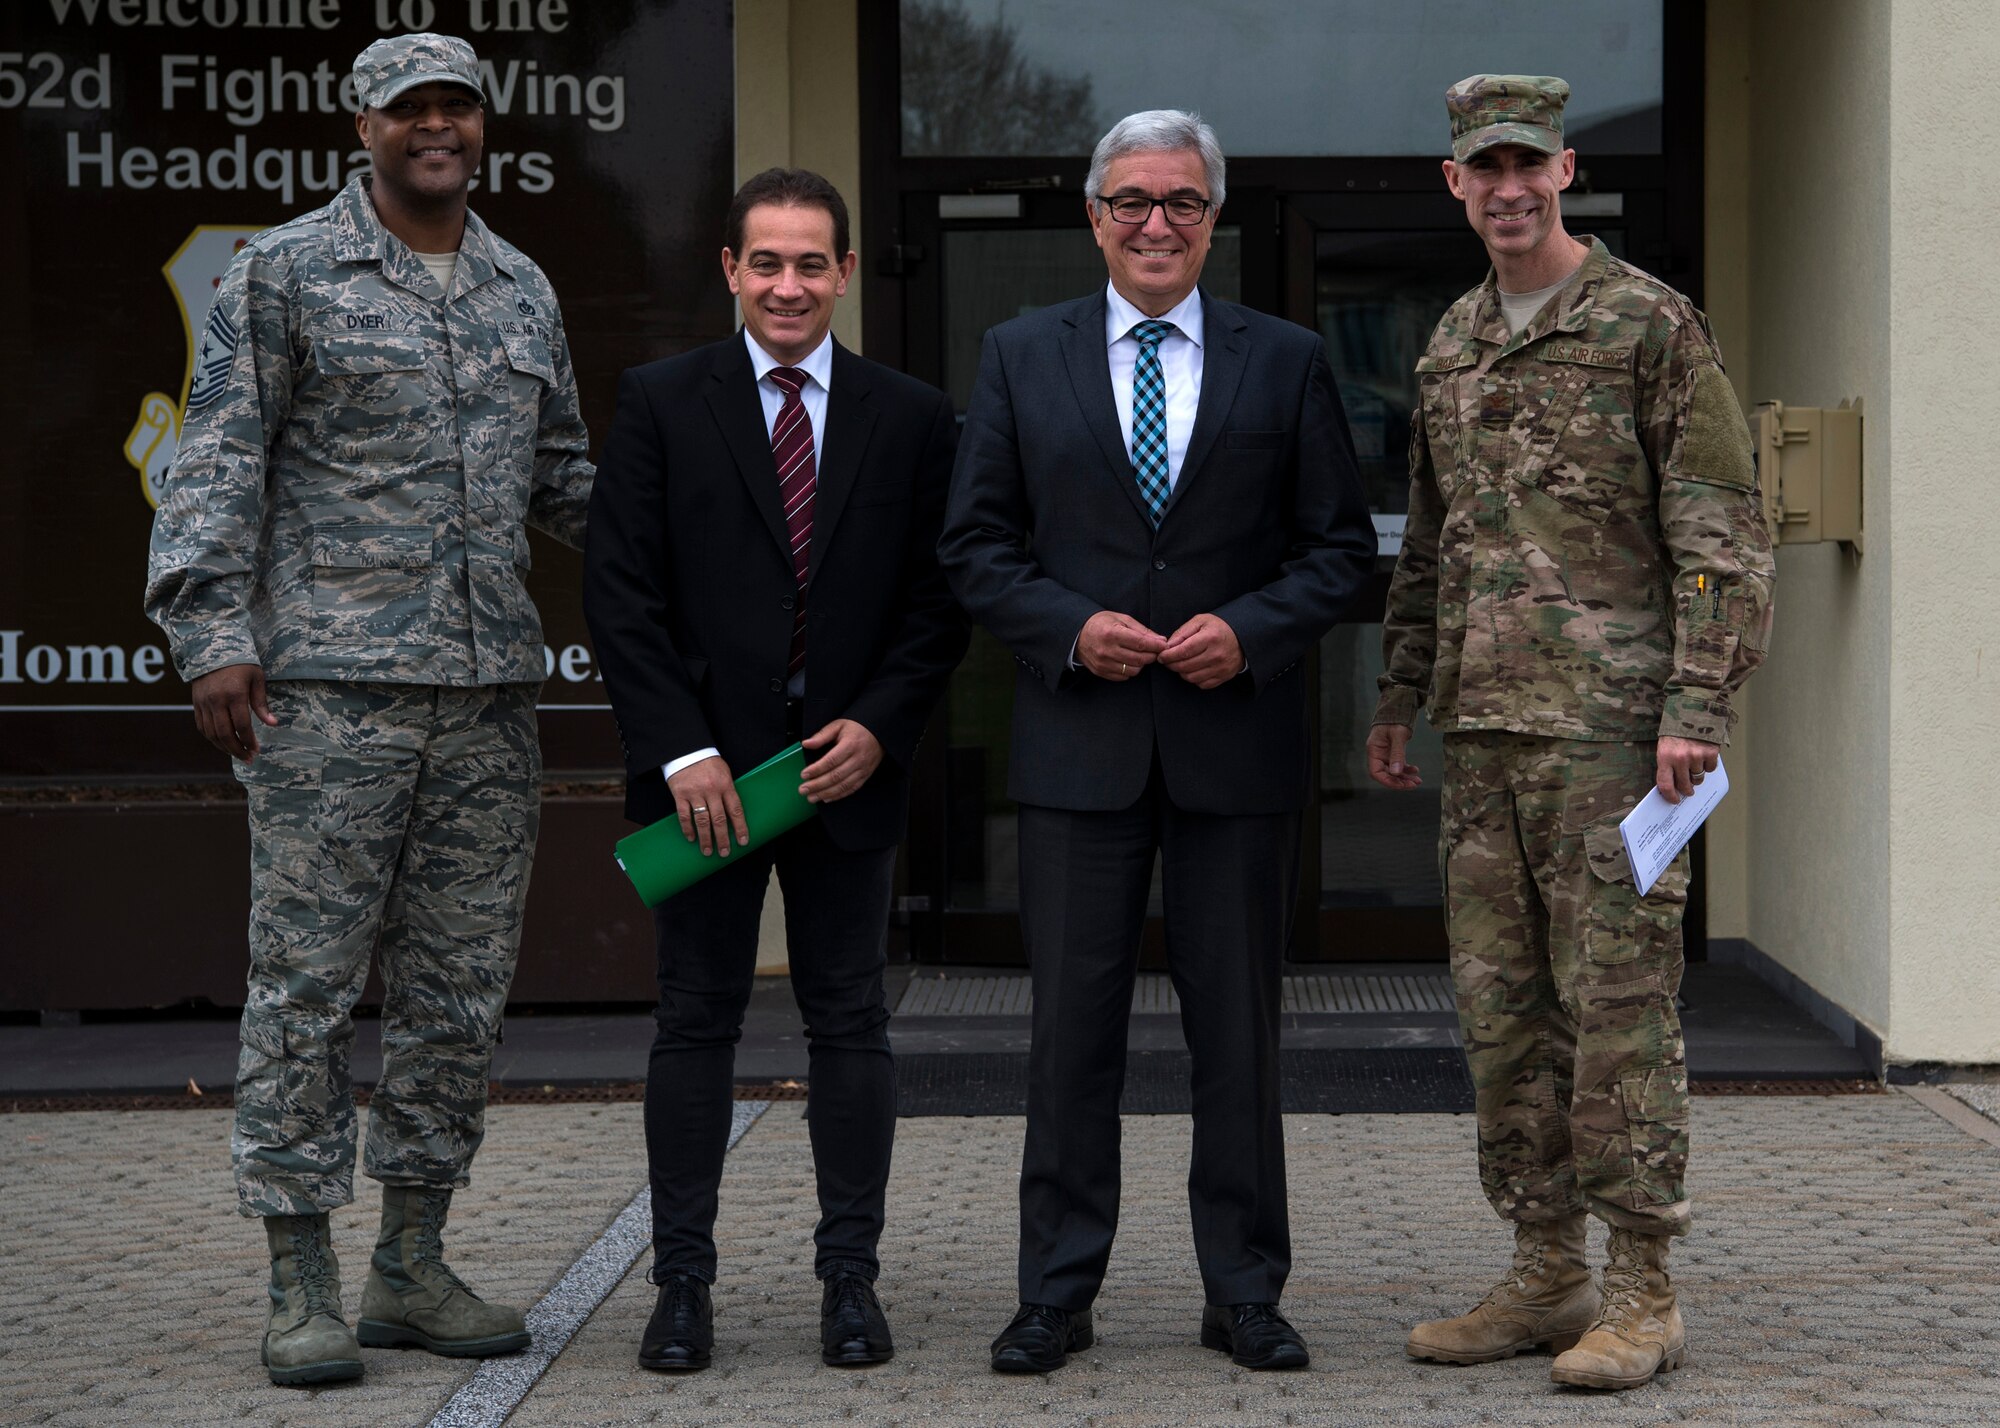 U.S. Air Force Col. Jason Bailey, 52nd Fighter Wing commander, right, and Chief Master Sgt. Alvin Dyer, 52nd FW command chief, left, welcome Roger Lewentz, Minister of the Interior of Rhineland-Palatinate, Germany, center right, and Dr. Hannes Kopf, Ministerial Director of the Ministry of the Interior, center left, to Spangdahlem Air Base, Germany, Oct. 22, 2018. The visit gave Lewentz and Kopf an opportunity to learn about base functions. (U.S. Air Force photo by Airman 1st Class Valerie Seelye)